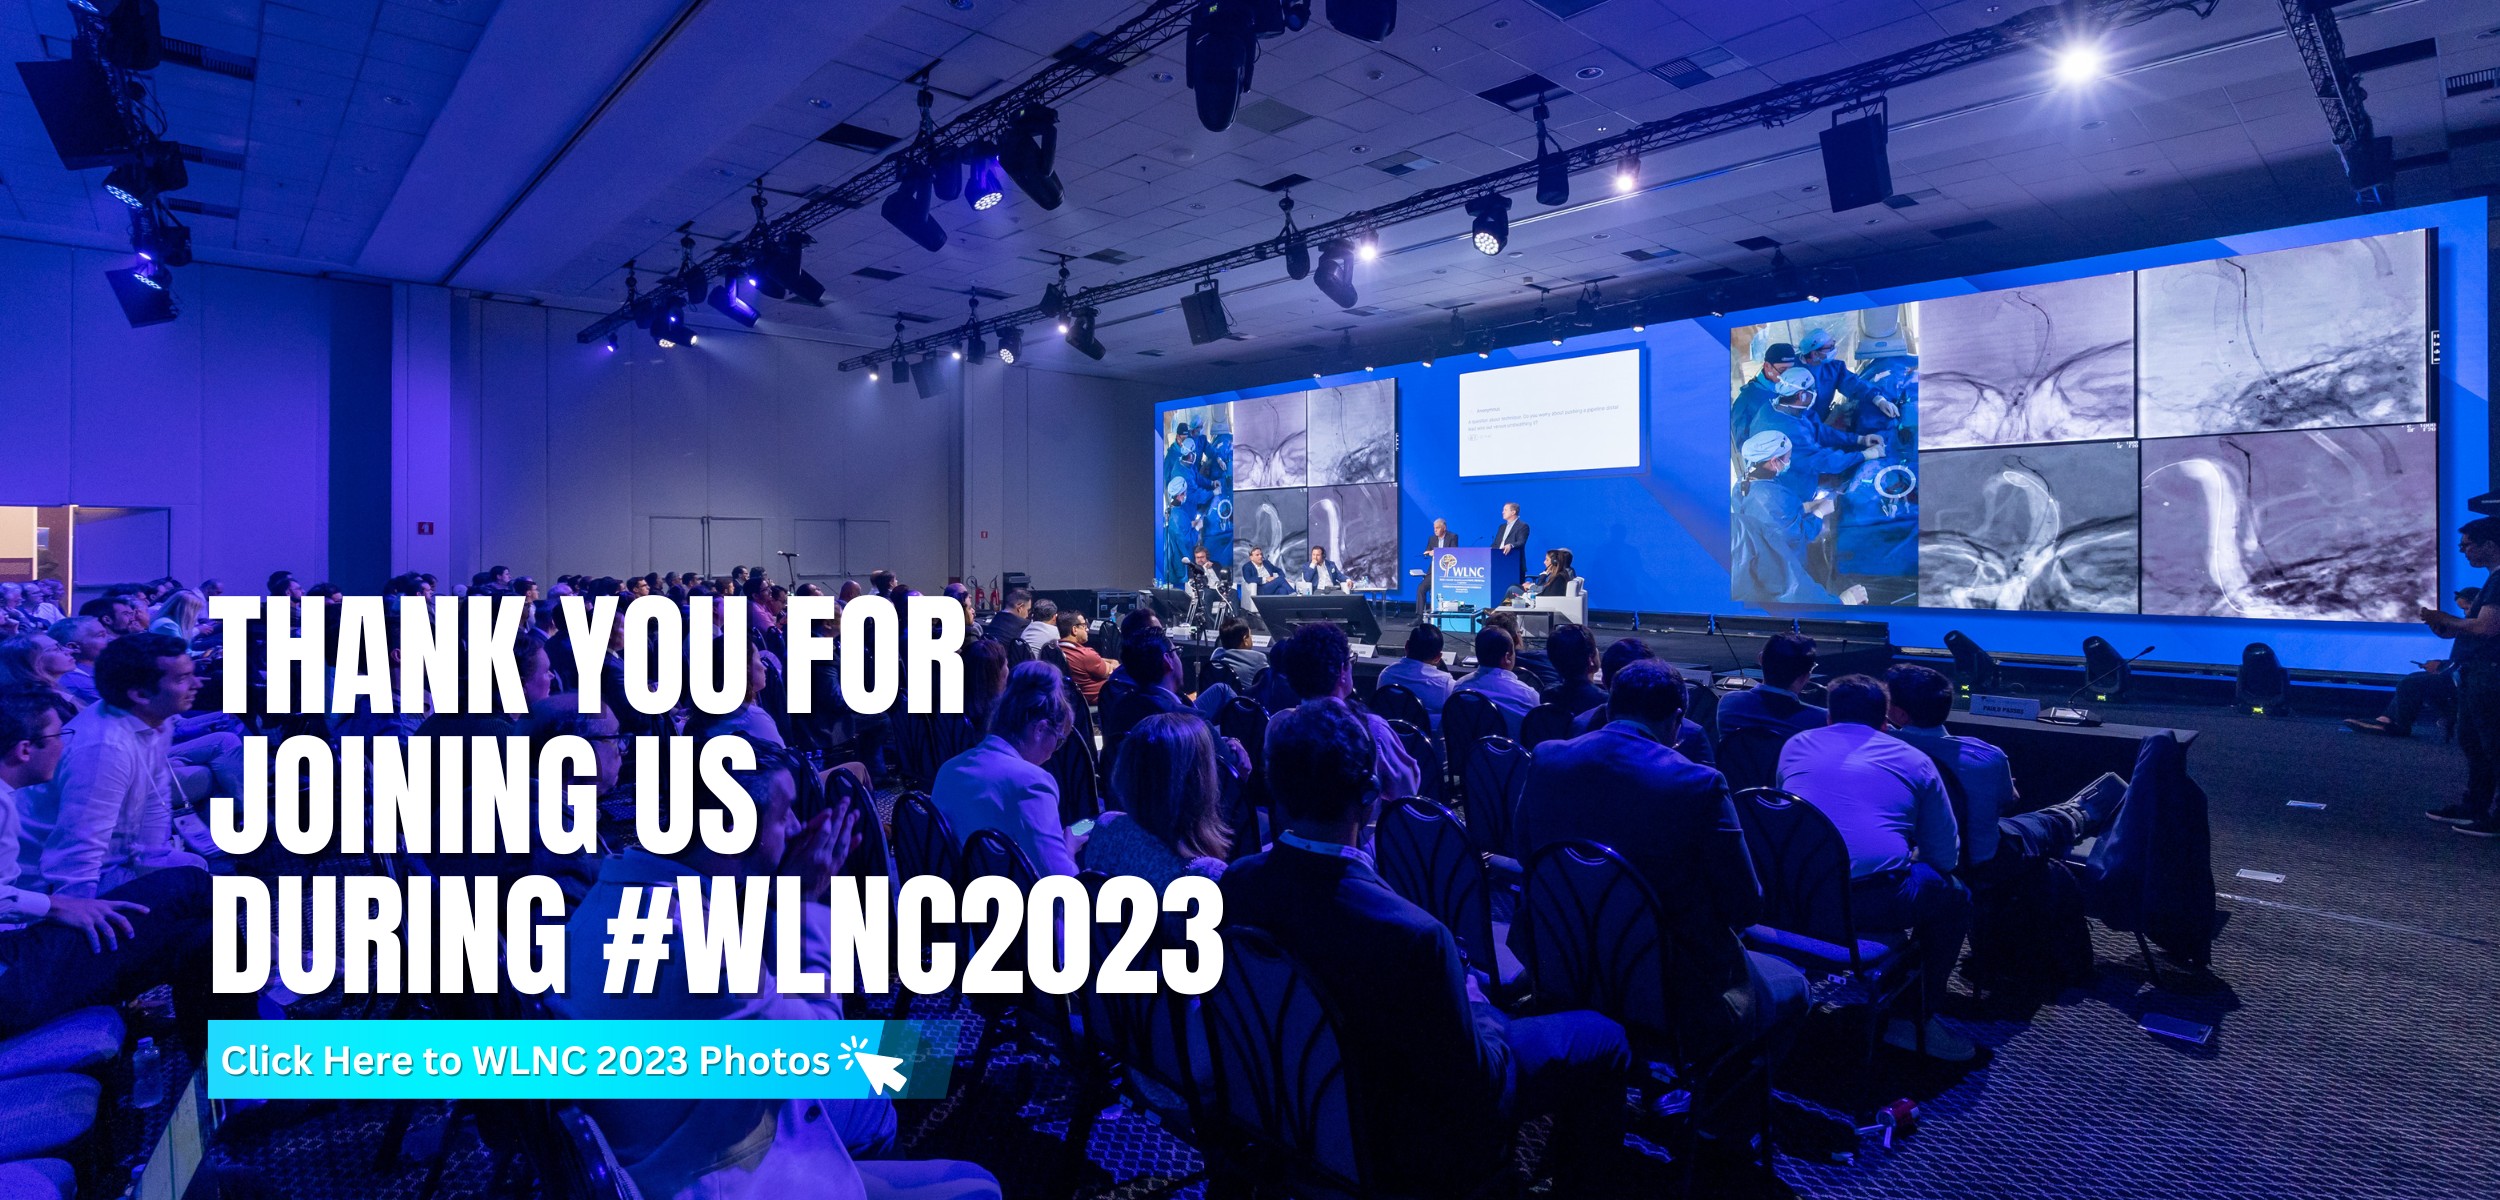 WLNC 2023 - Thank you for joining us